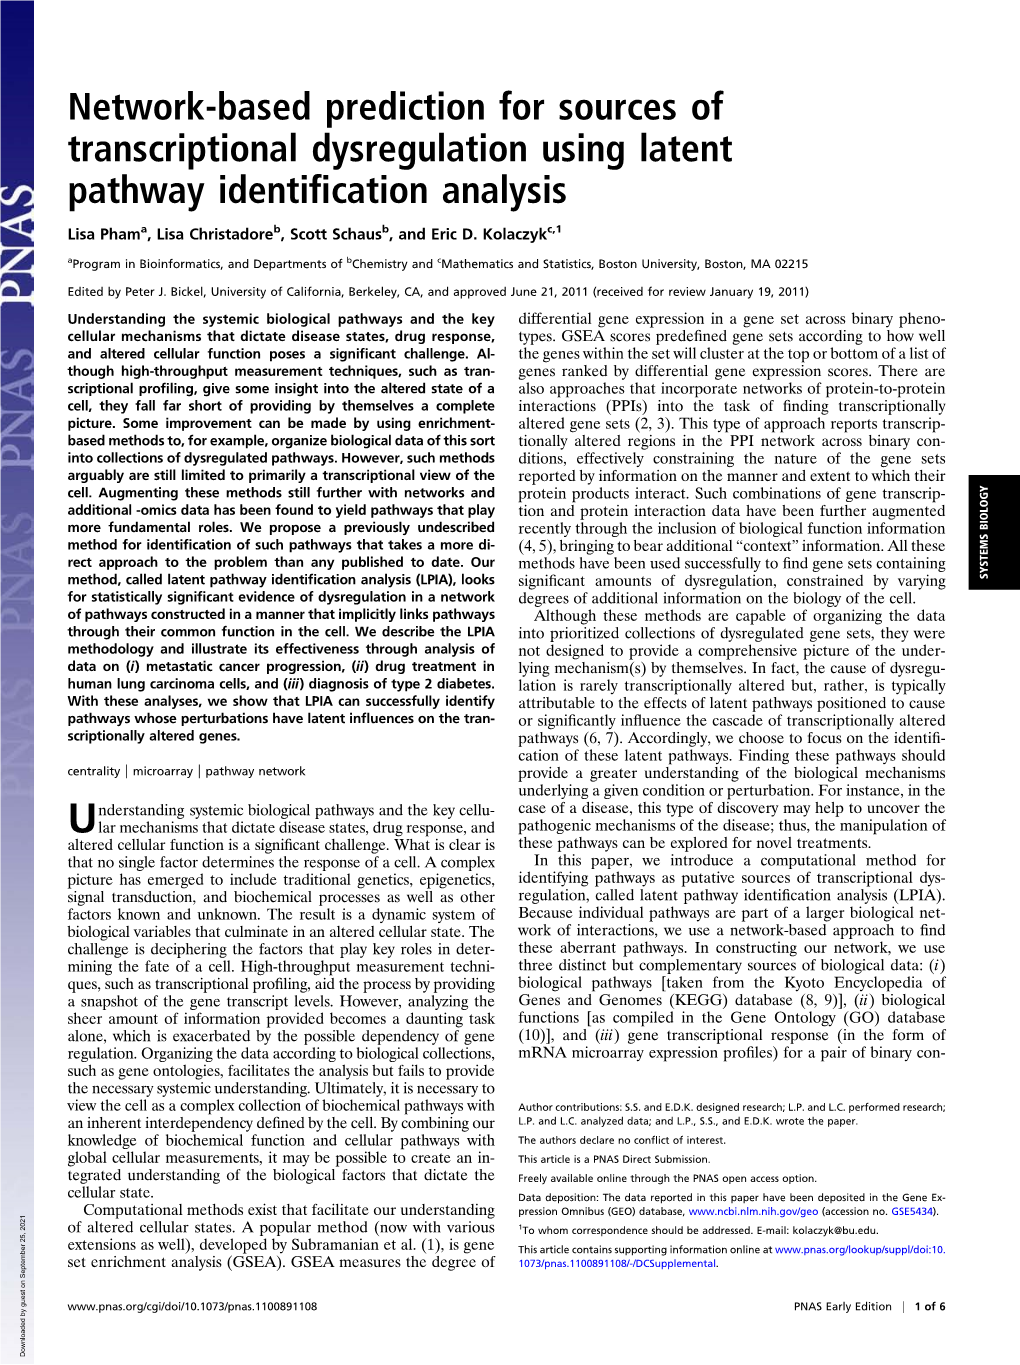 Network-Based Prediction for Sources of Transcriptional Dysregulation Using Latent Pathway Identiﬁcation Analysis